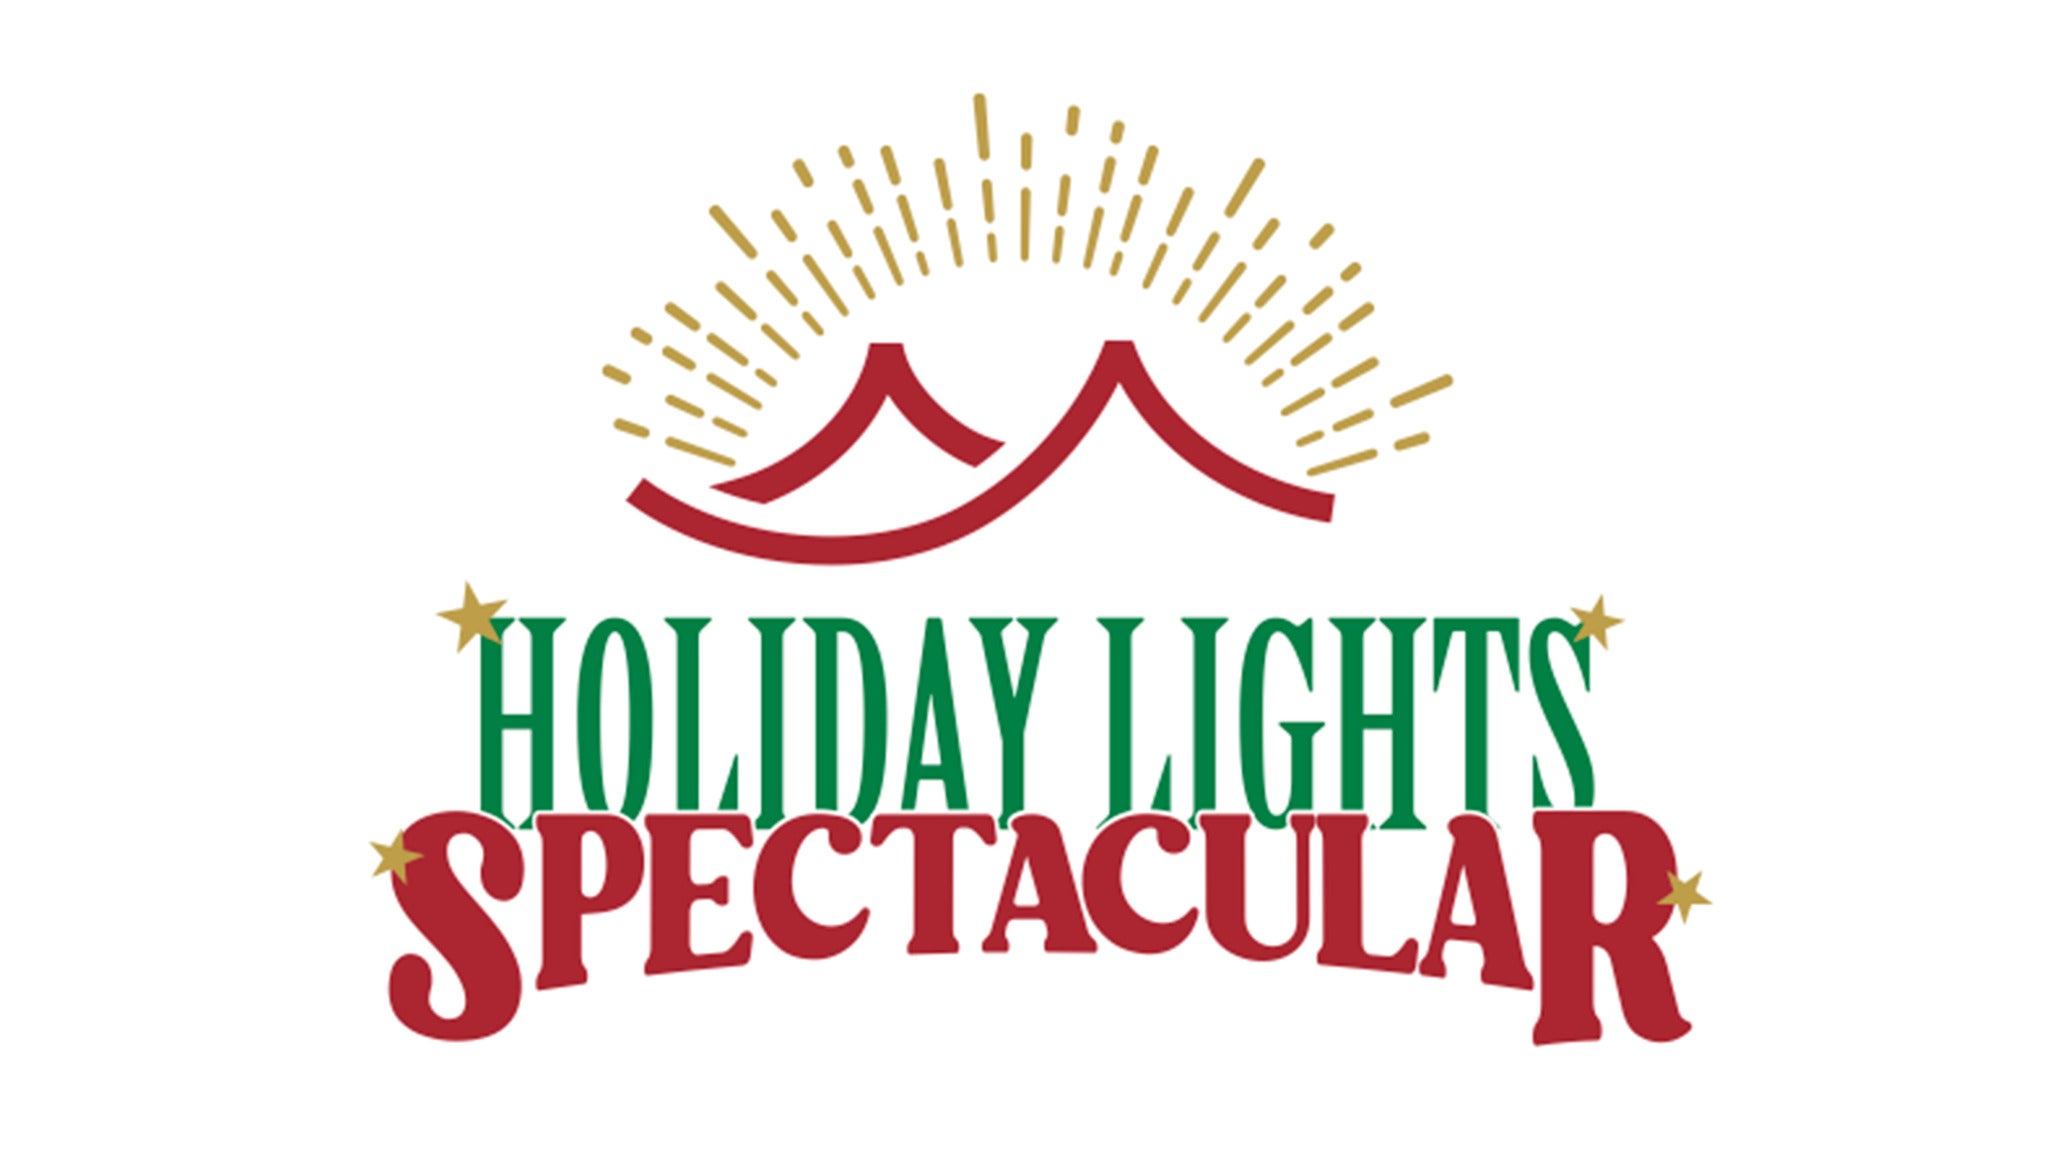 Holiday Lights Spectacular in Bridgeport promo photo for Exclusive presale offer code